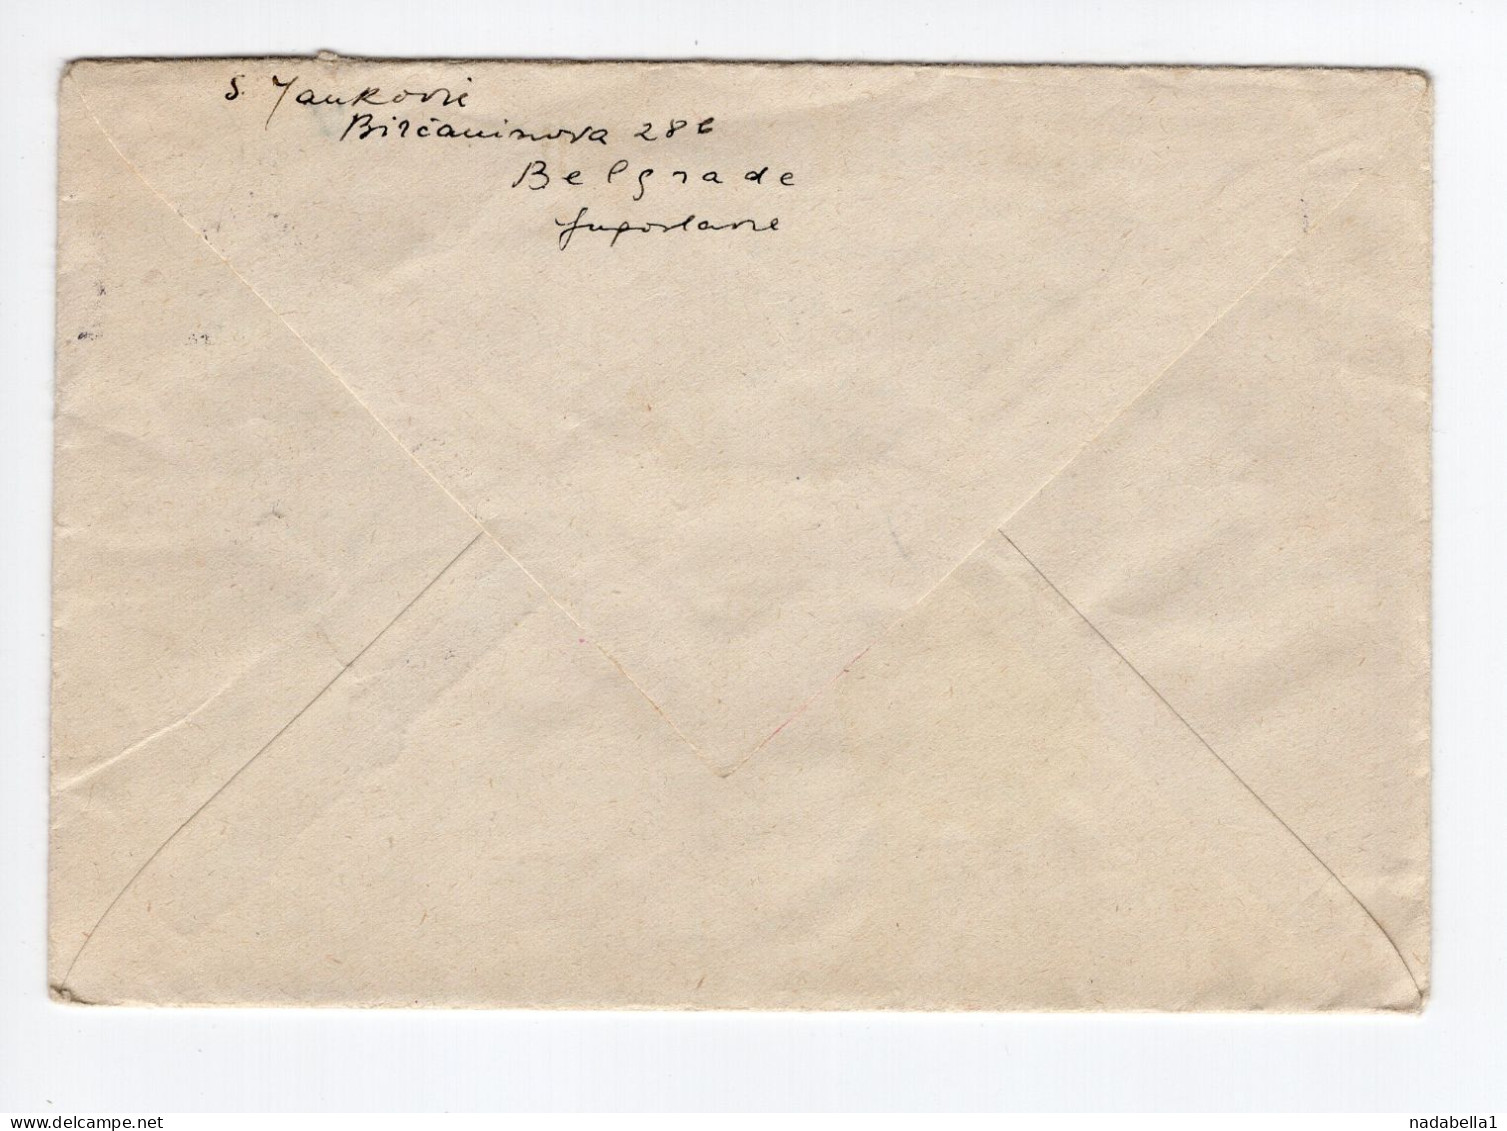 1957. YUGOSLAVIA,SERBIA,BELGRADE,AIRMAIL COVER TO LONDON,GREAT BRITAIN,LETTER INSIDE - Airmail